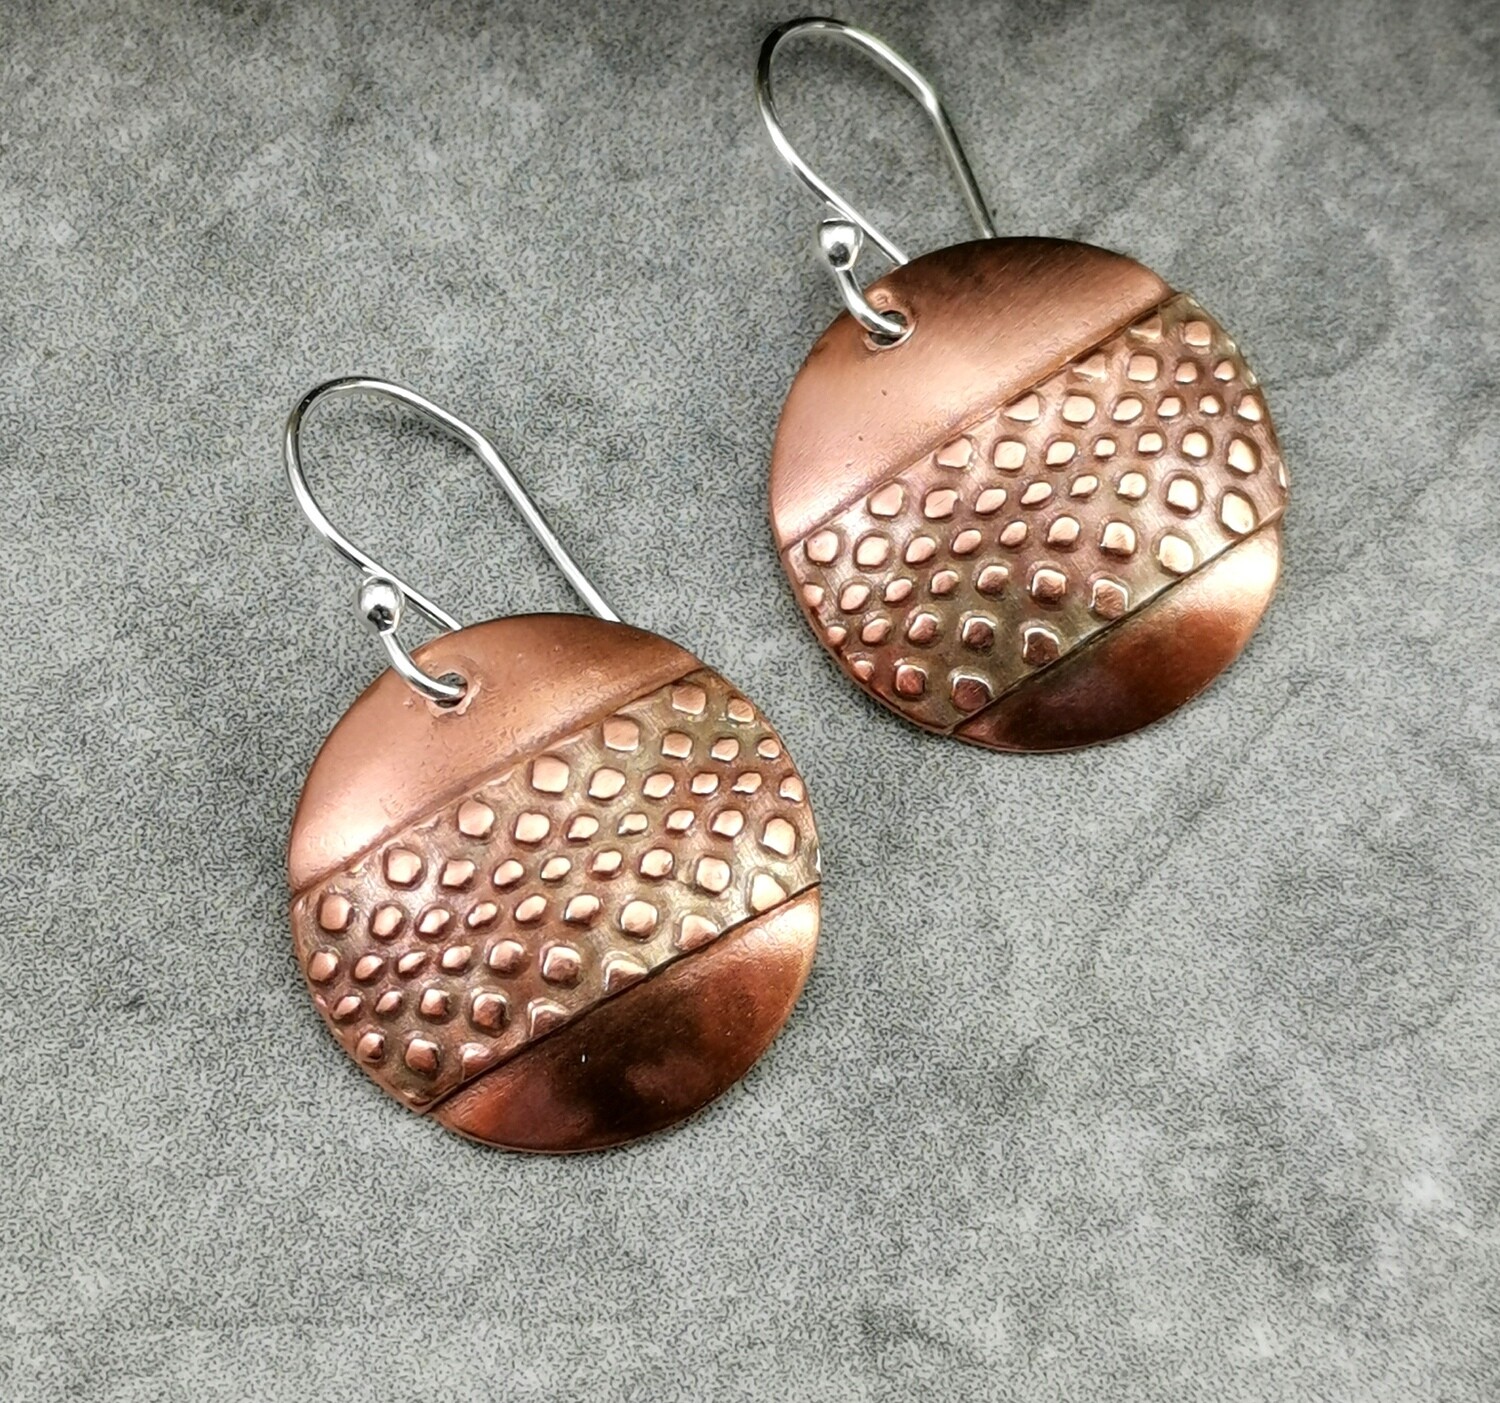 Brushed Copper Earrings with Patterned Copper Soldered Across Center